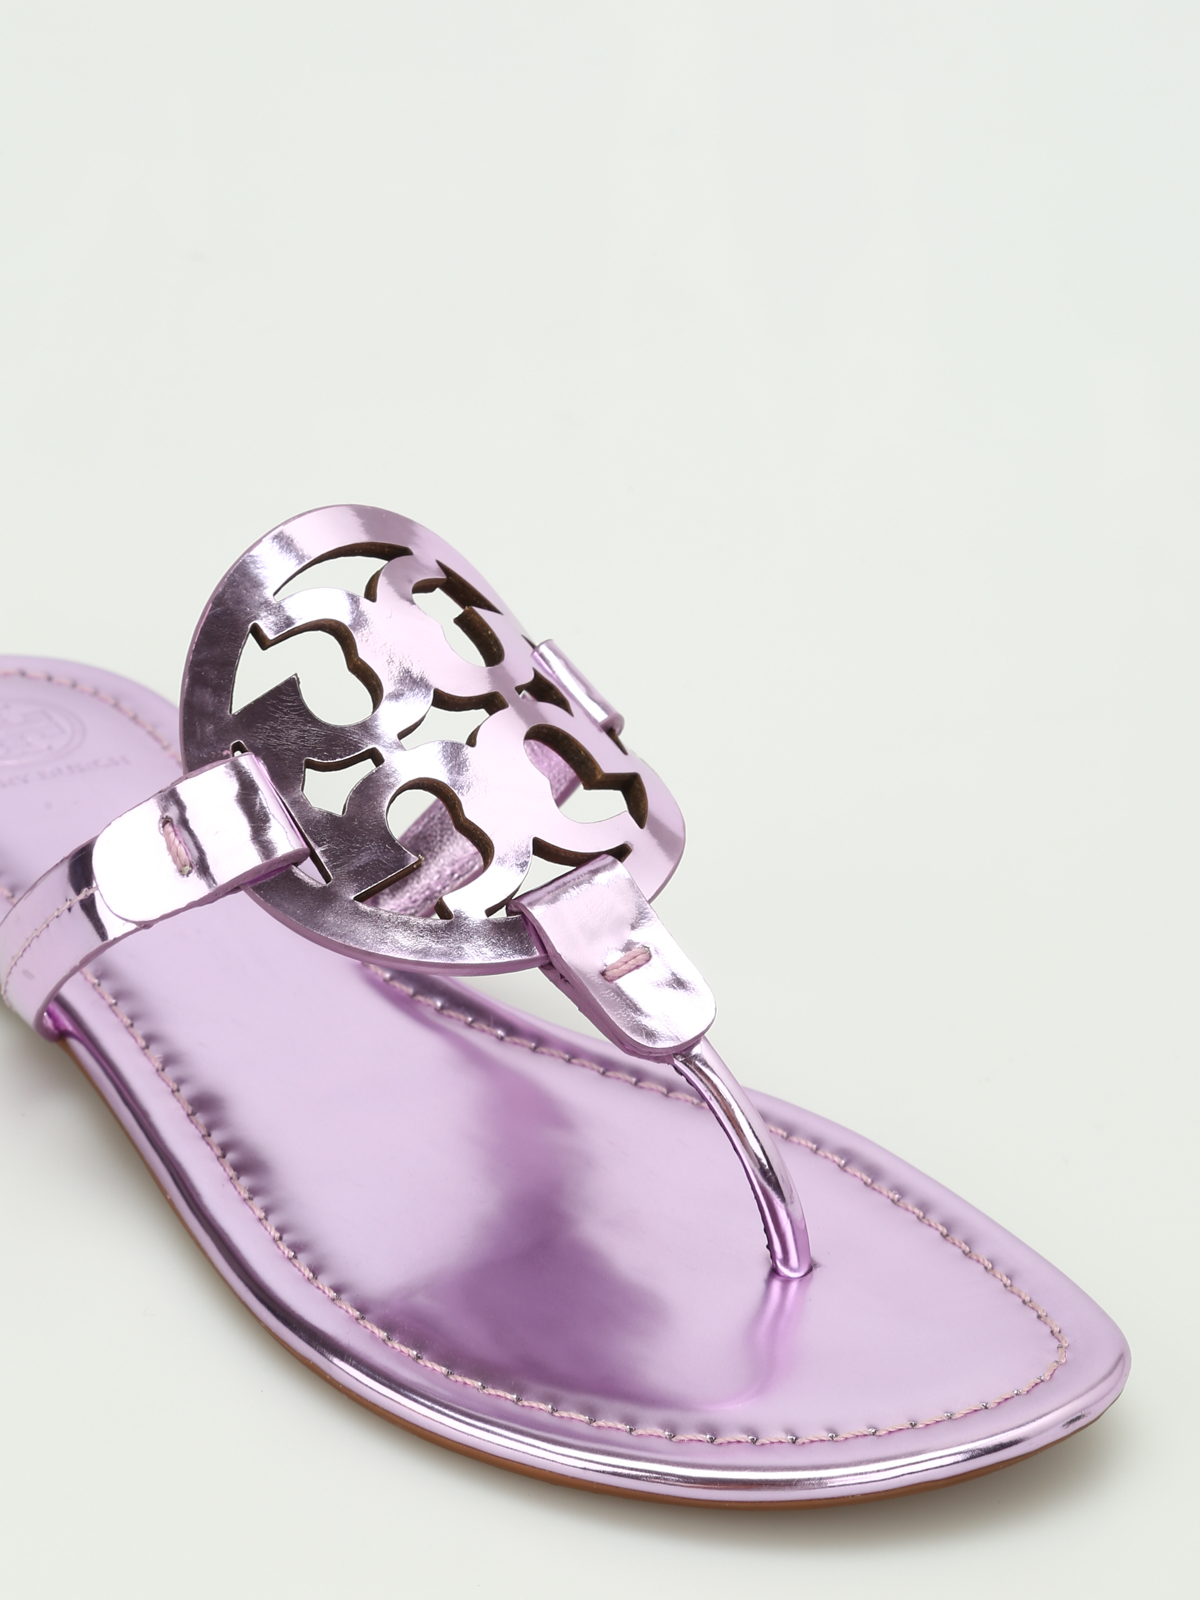 tory burch patent leather flip flops